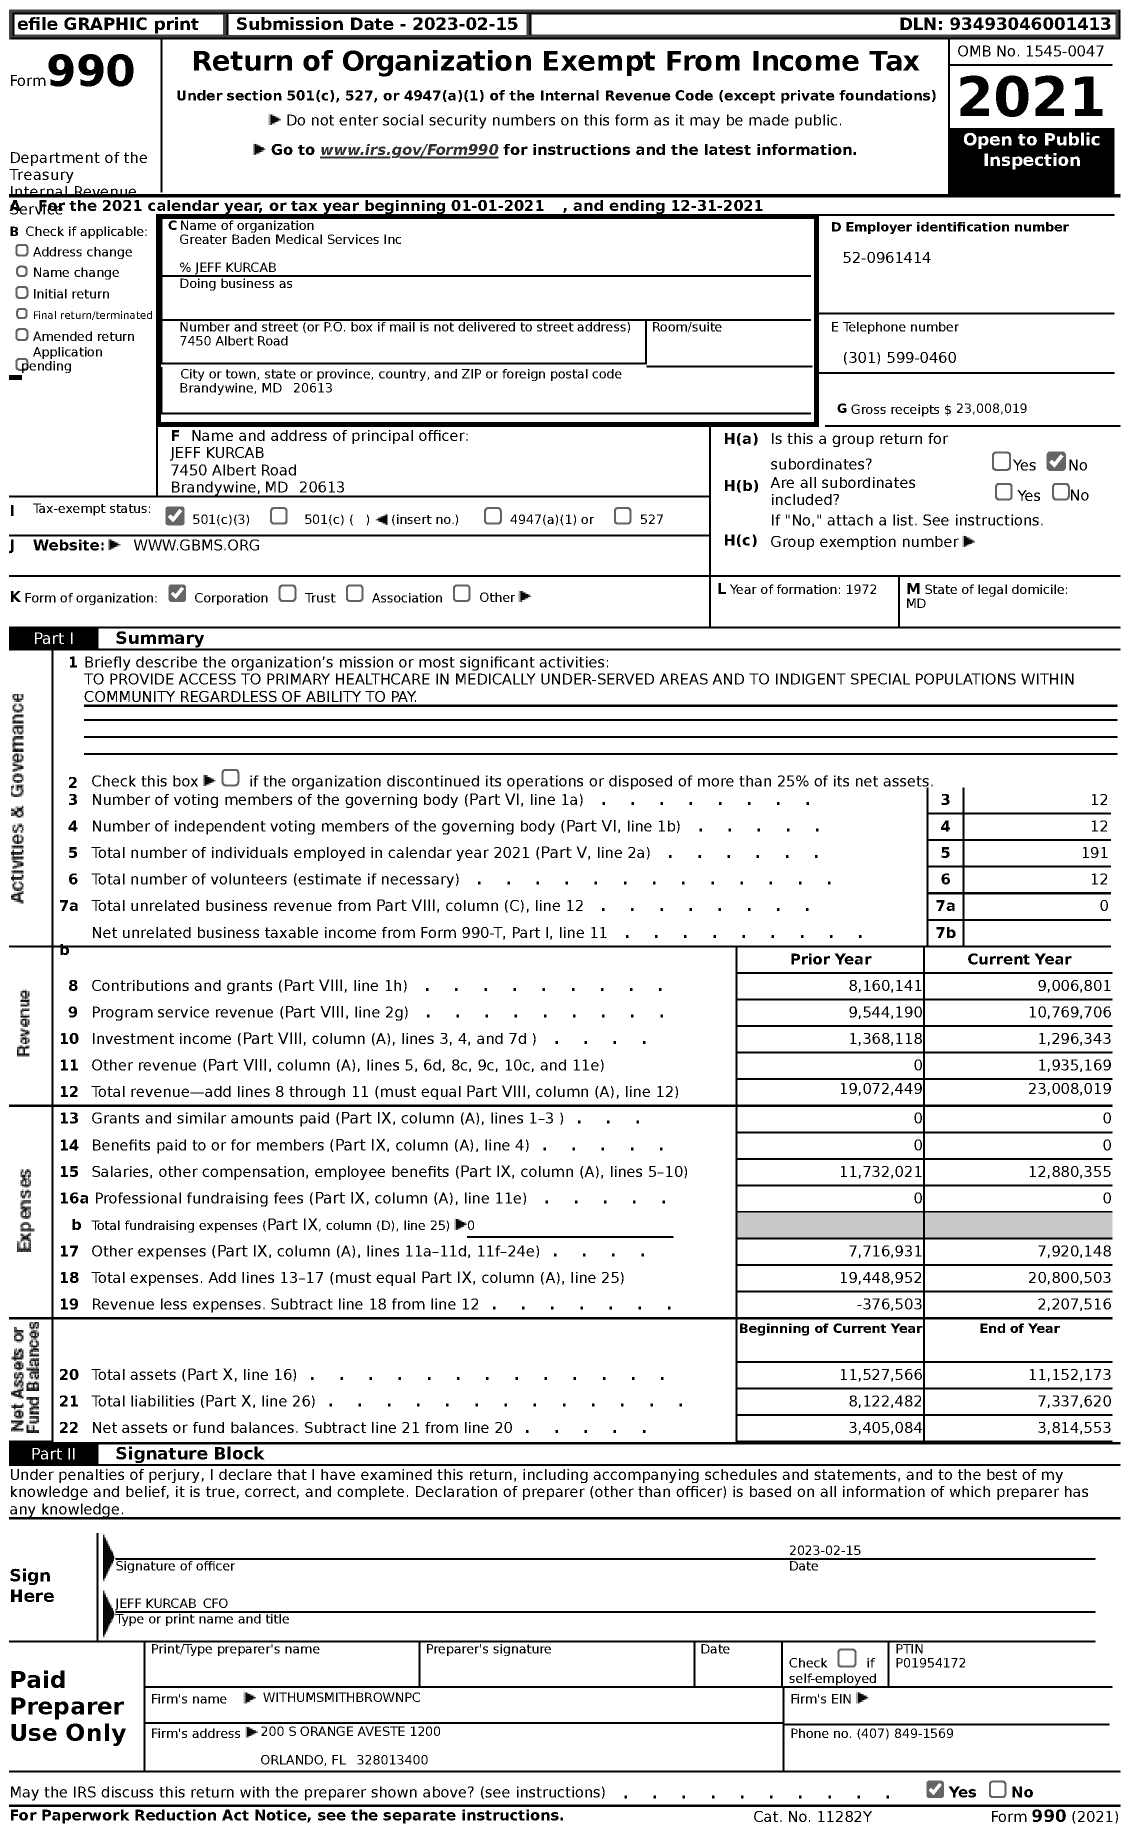 Image of first page of 2021 Form 990 for Greater Baden Medical Service (GBMS)